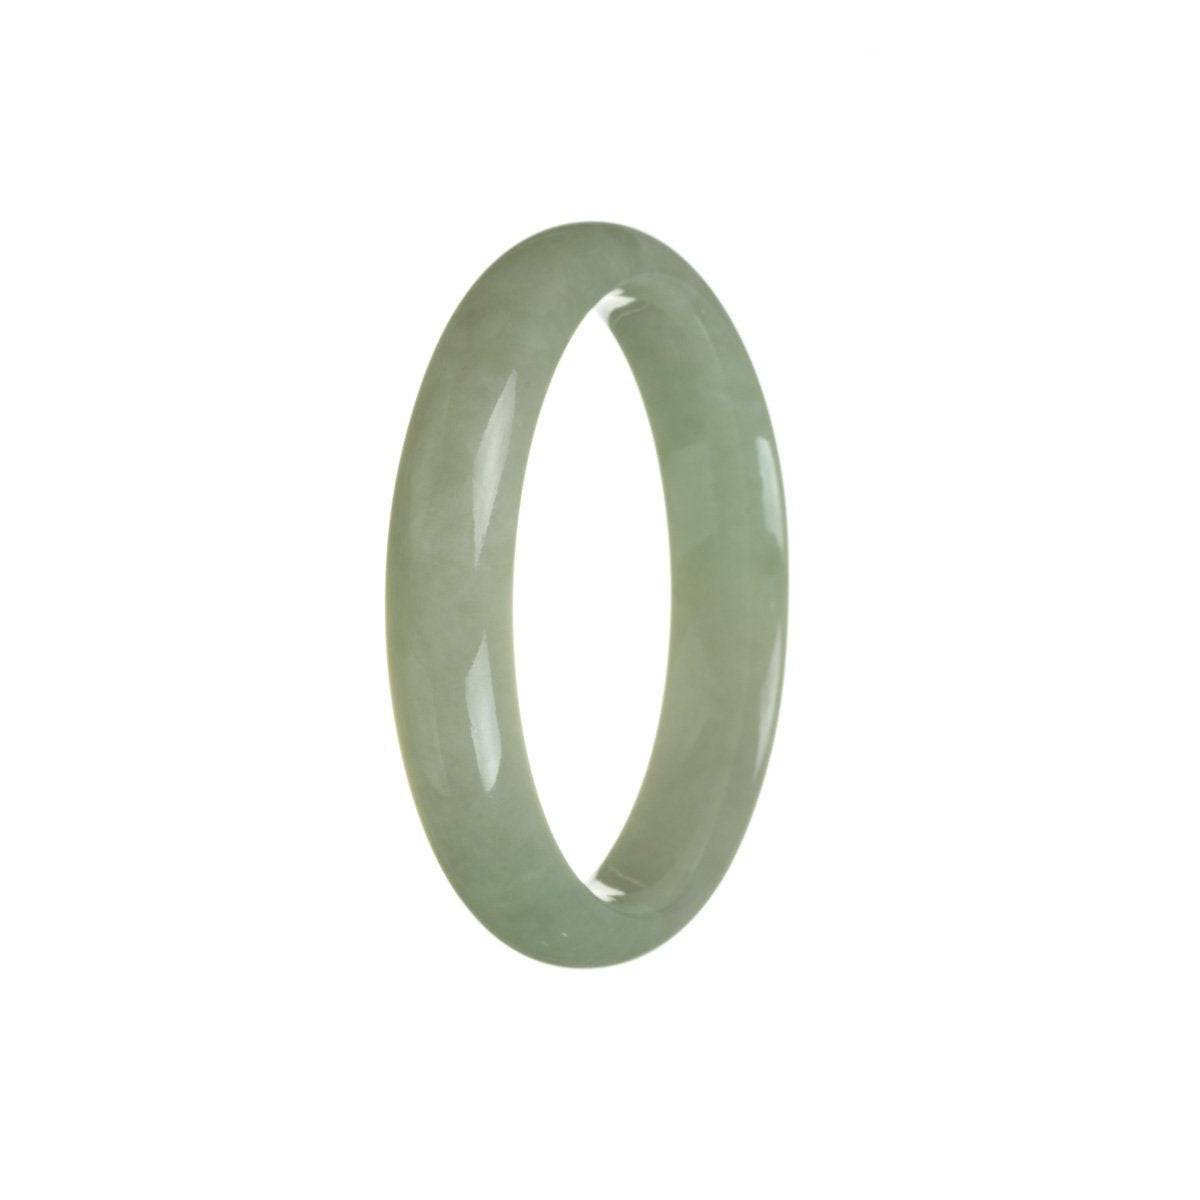 A close-up image of a half-moon shaped, genuine Type A Green Burma Jade bangle with a diameter of 57mm. The bangle has a smooth and polished surface, showcasing the beautiful green hue of the jade. It is a high-quality piece from MAYS™.